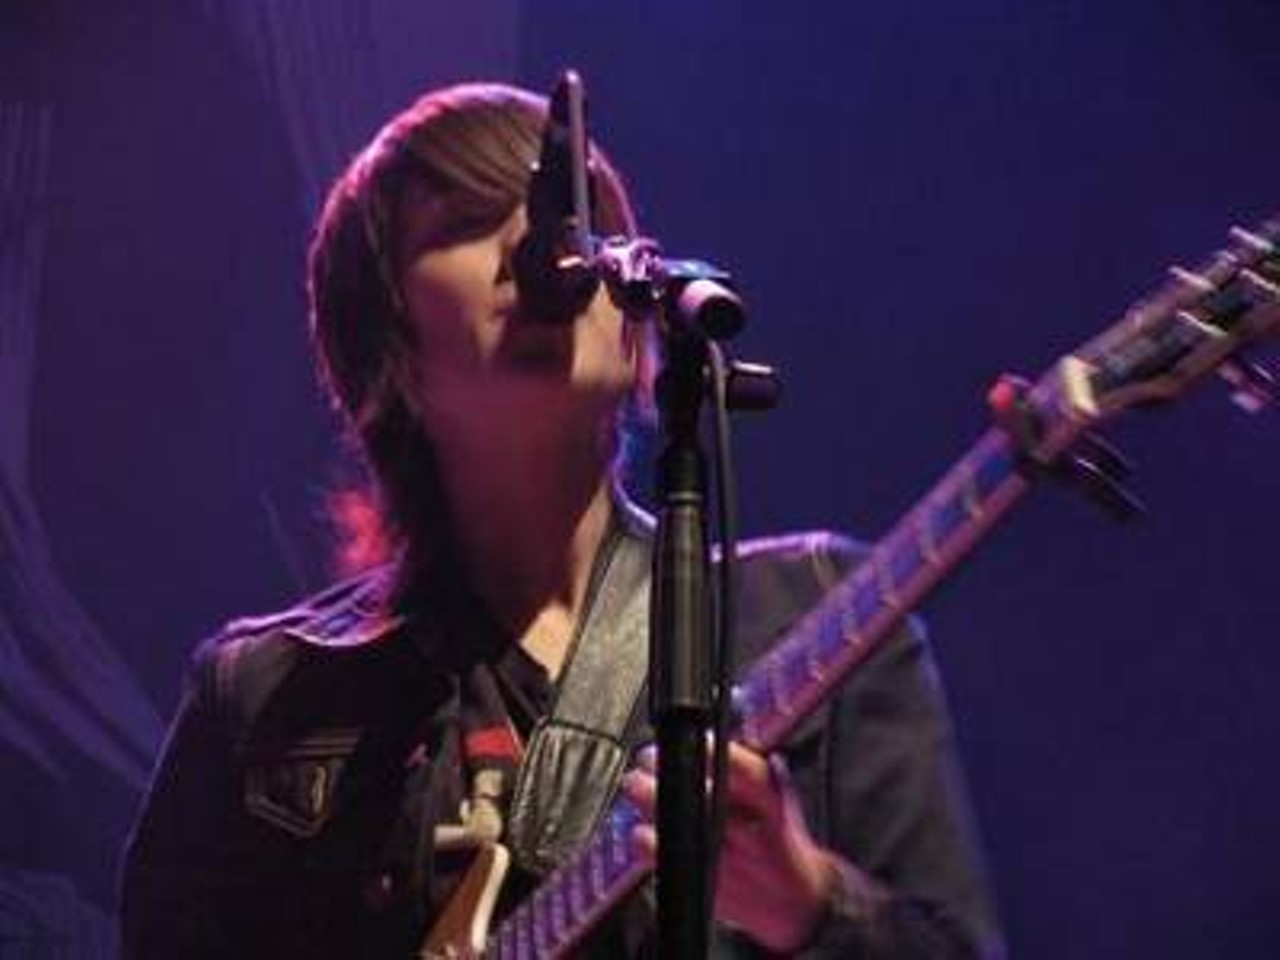 Canadian pop duo Tegan & Sara played to a packed-house at The Pageant on May 4. See more pictures here and read the show review here.